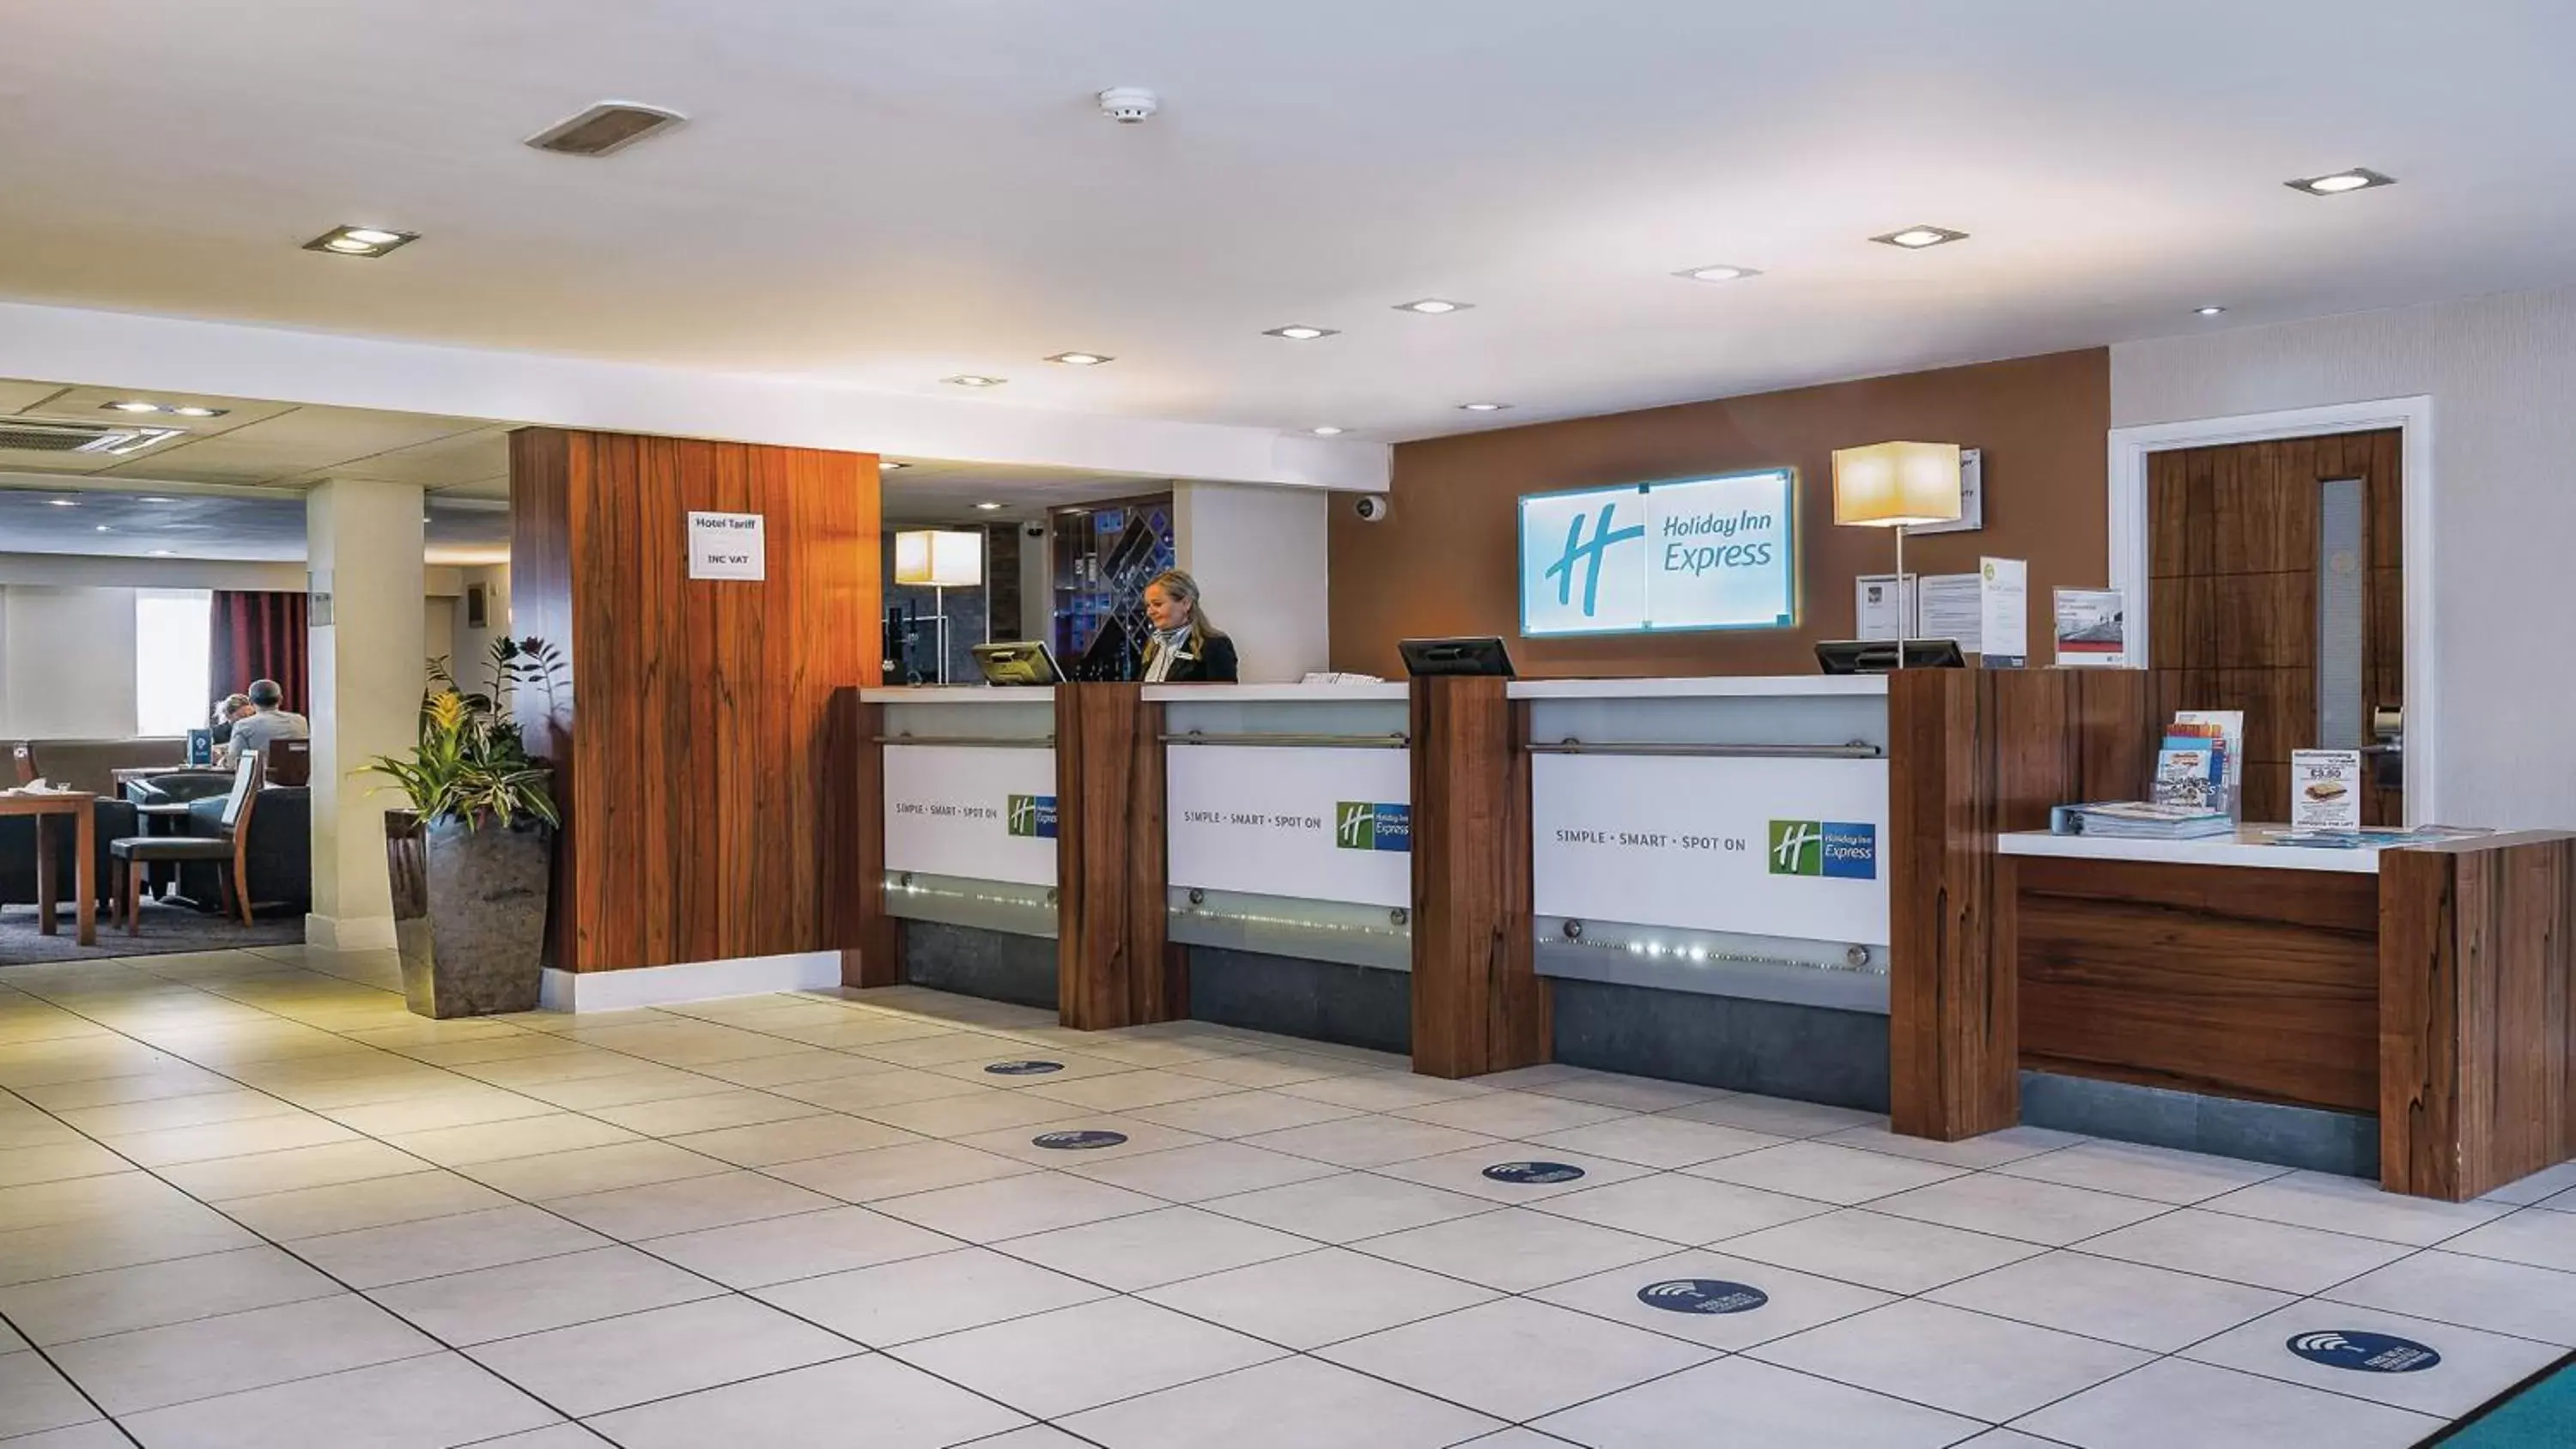 Property building, Lobby/Reception in Holiday Inn Express Glenrothes, an IHG Hotel